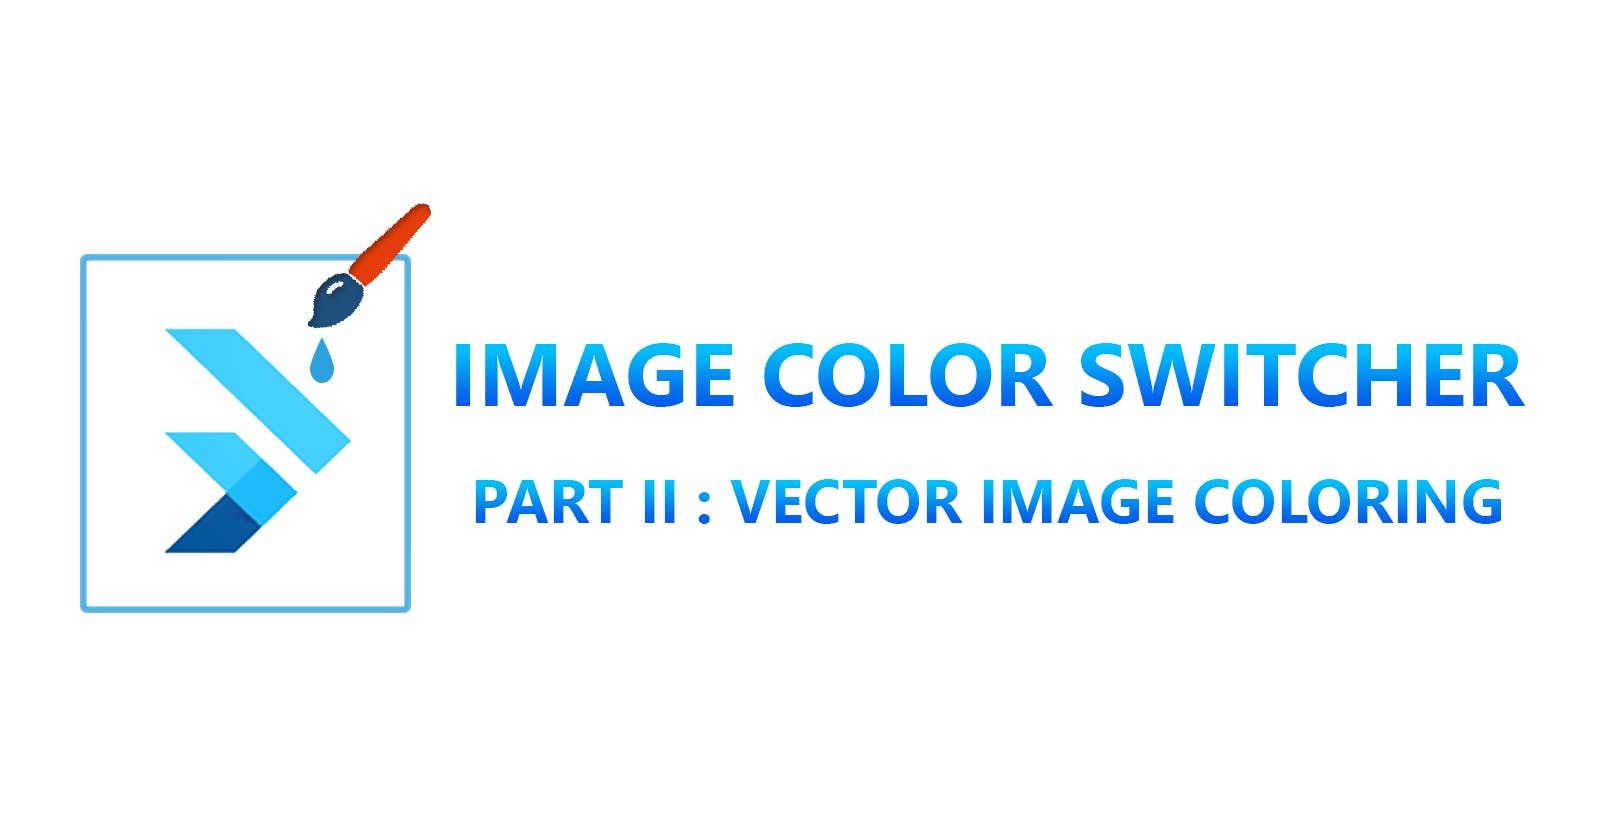 ImageColorSwitcher in Flutter: Part 2-Vector Image Coloring